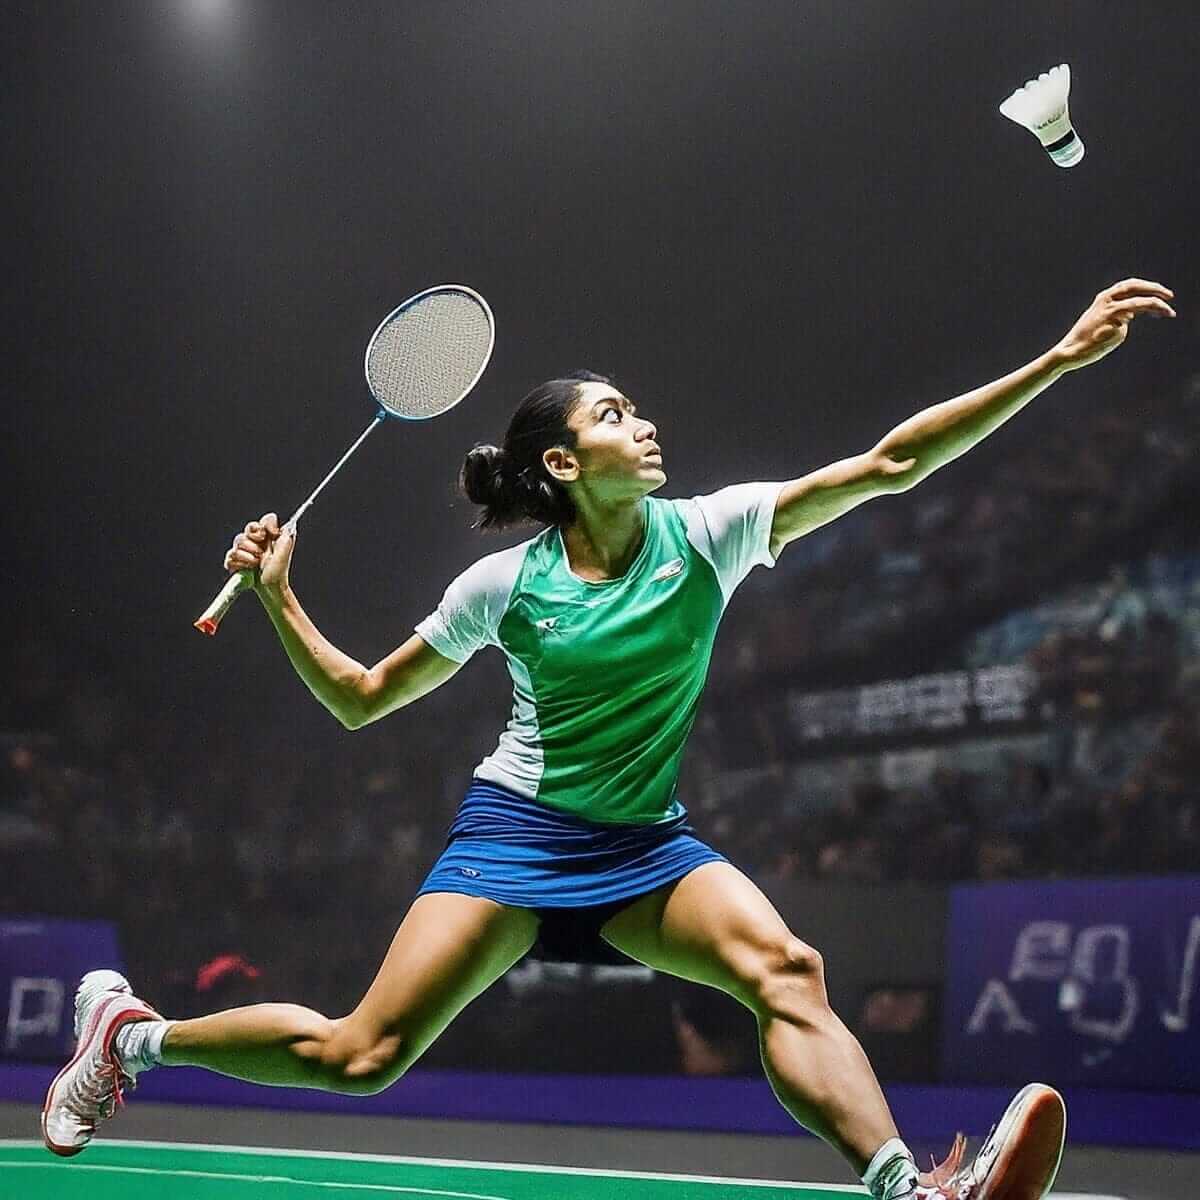 A woman in green shirt and blue skirt playing badminton. Stay safe and watch out for common badminton injuries!